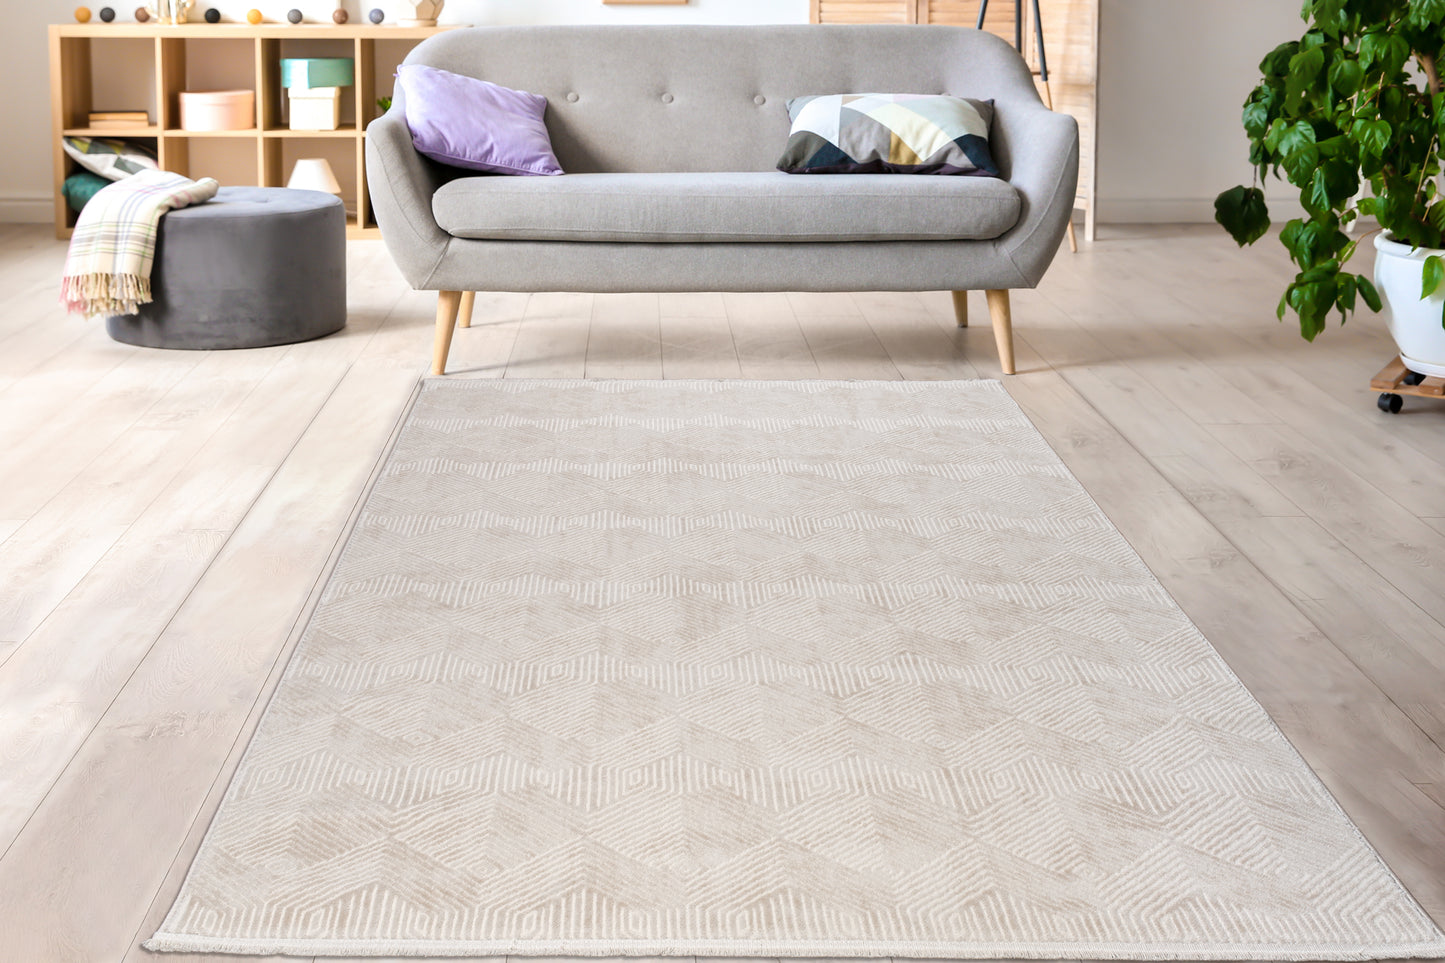 Ladole Rugs Geometric Pattern Room Decor Indoor Area Rug - Amazing Soft Premium Carpet for Living Room, Bedroom, Dining Room, Kitchen, and Office - Cream